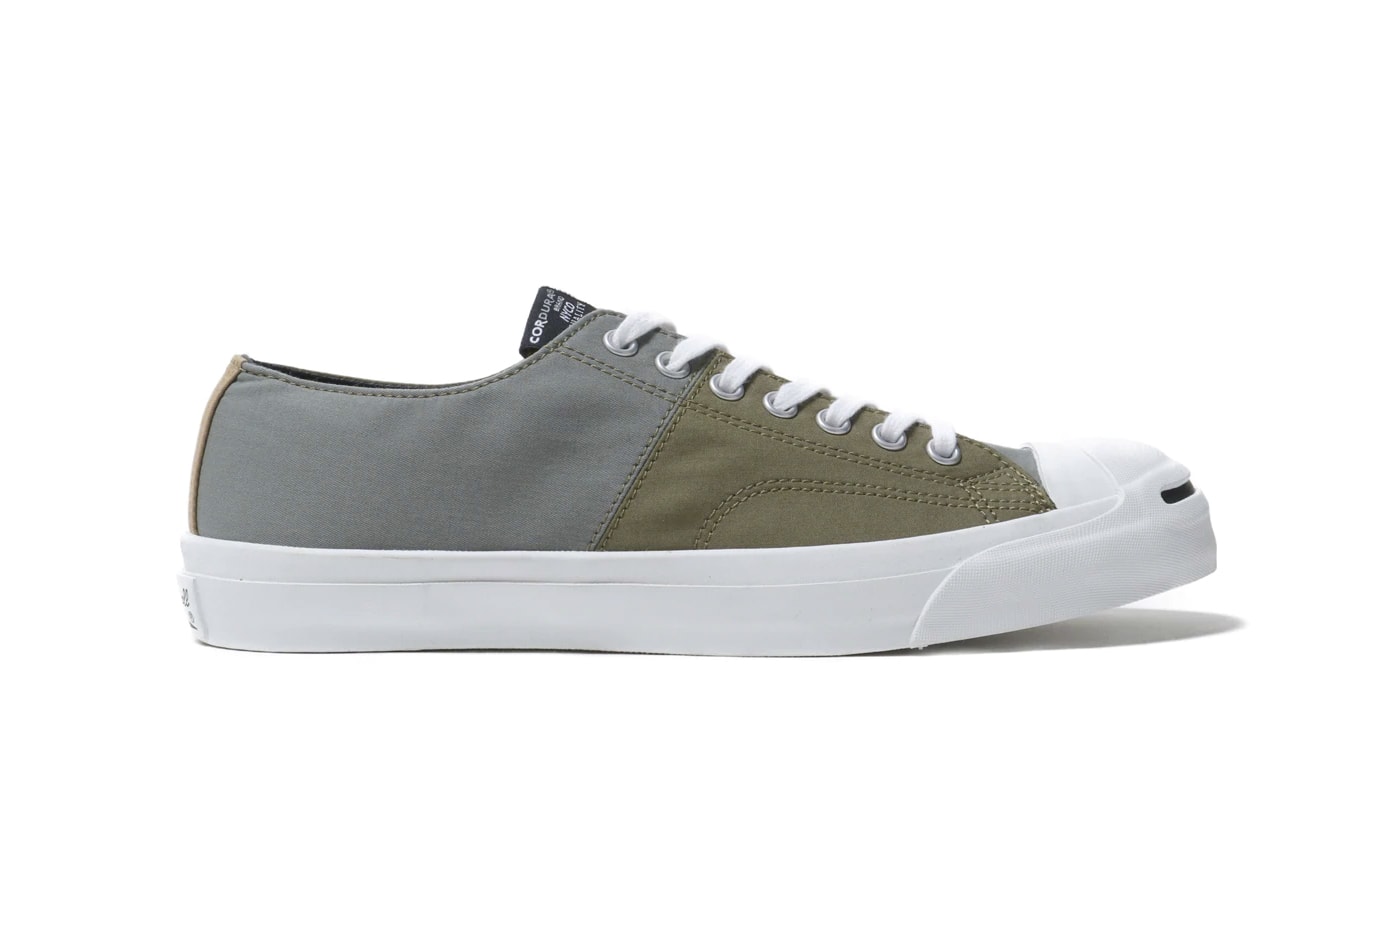 Converse Jack Purcell Cordura Nyco panels patchwork deconstruction earth tones olive beige grey white sneaker footwear classic shoe laces white